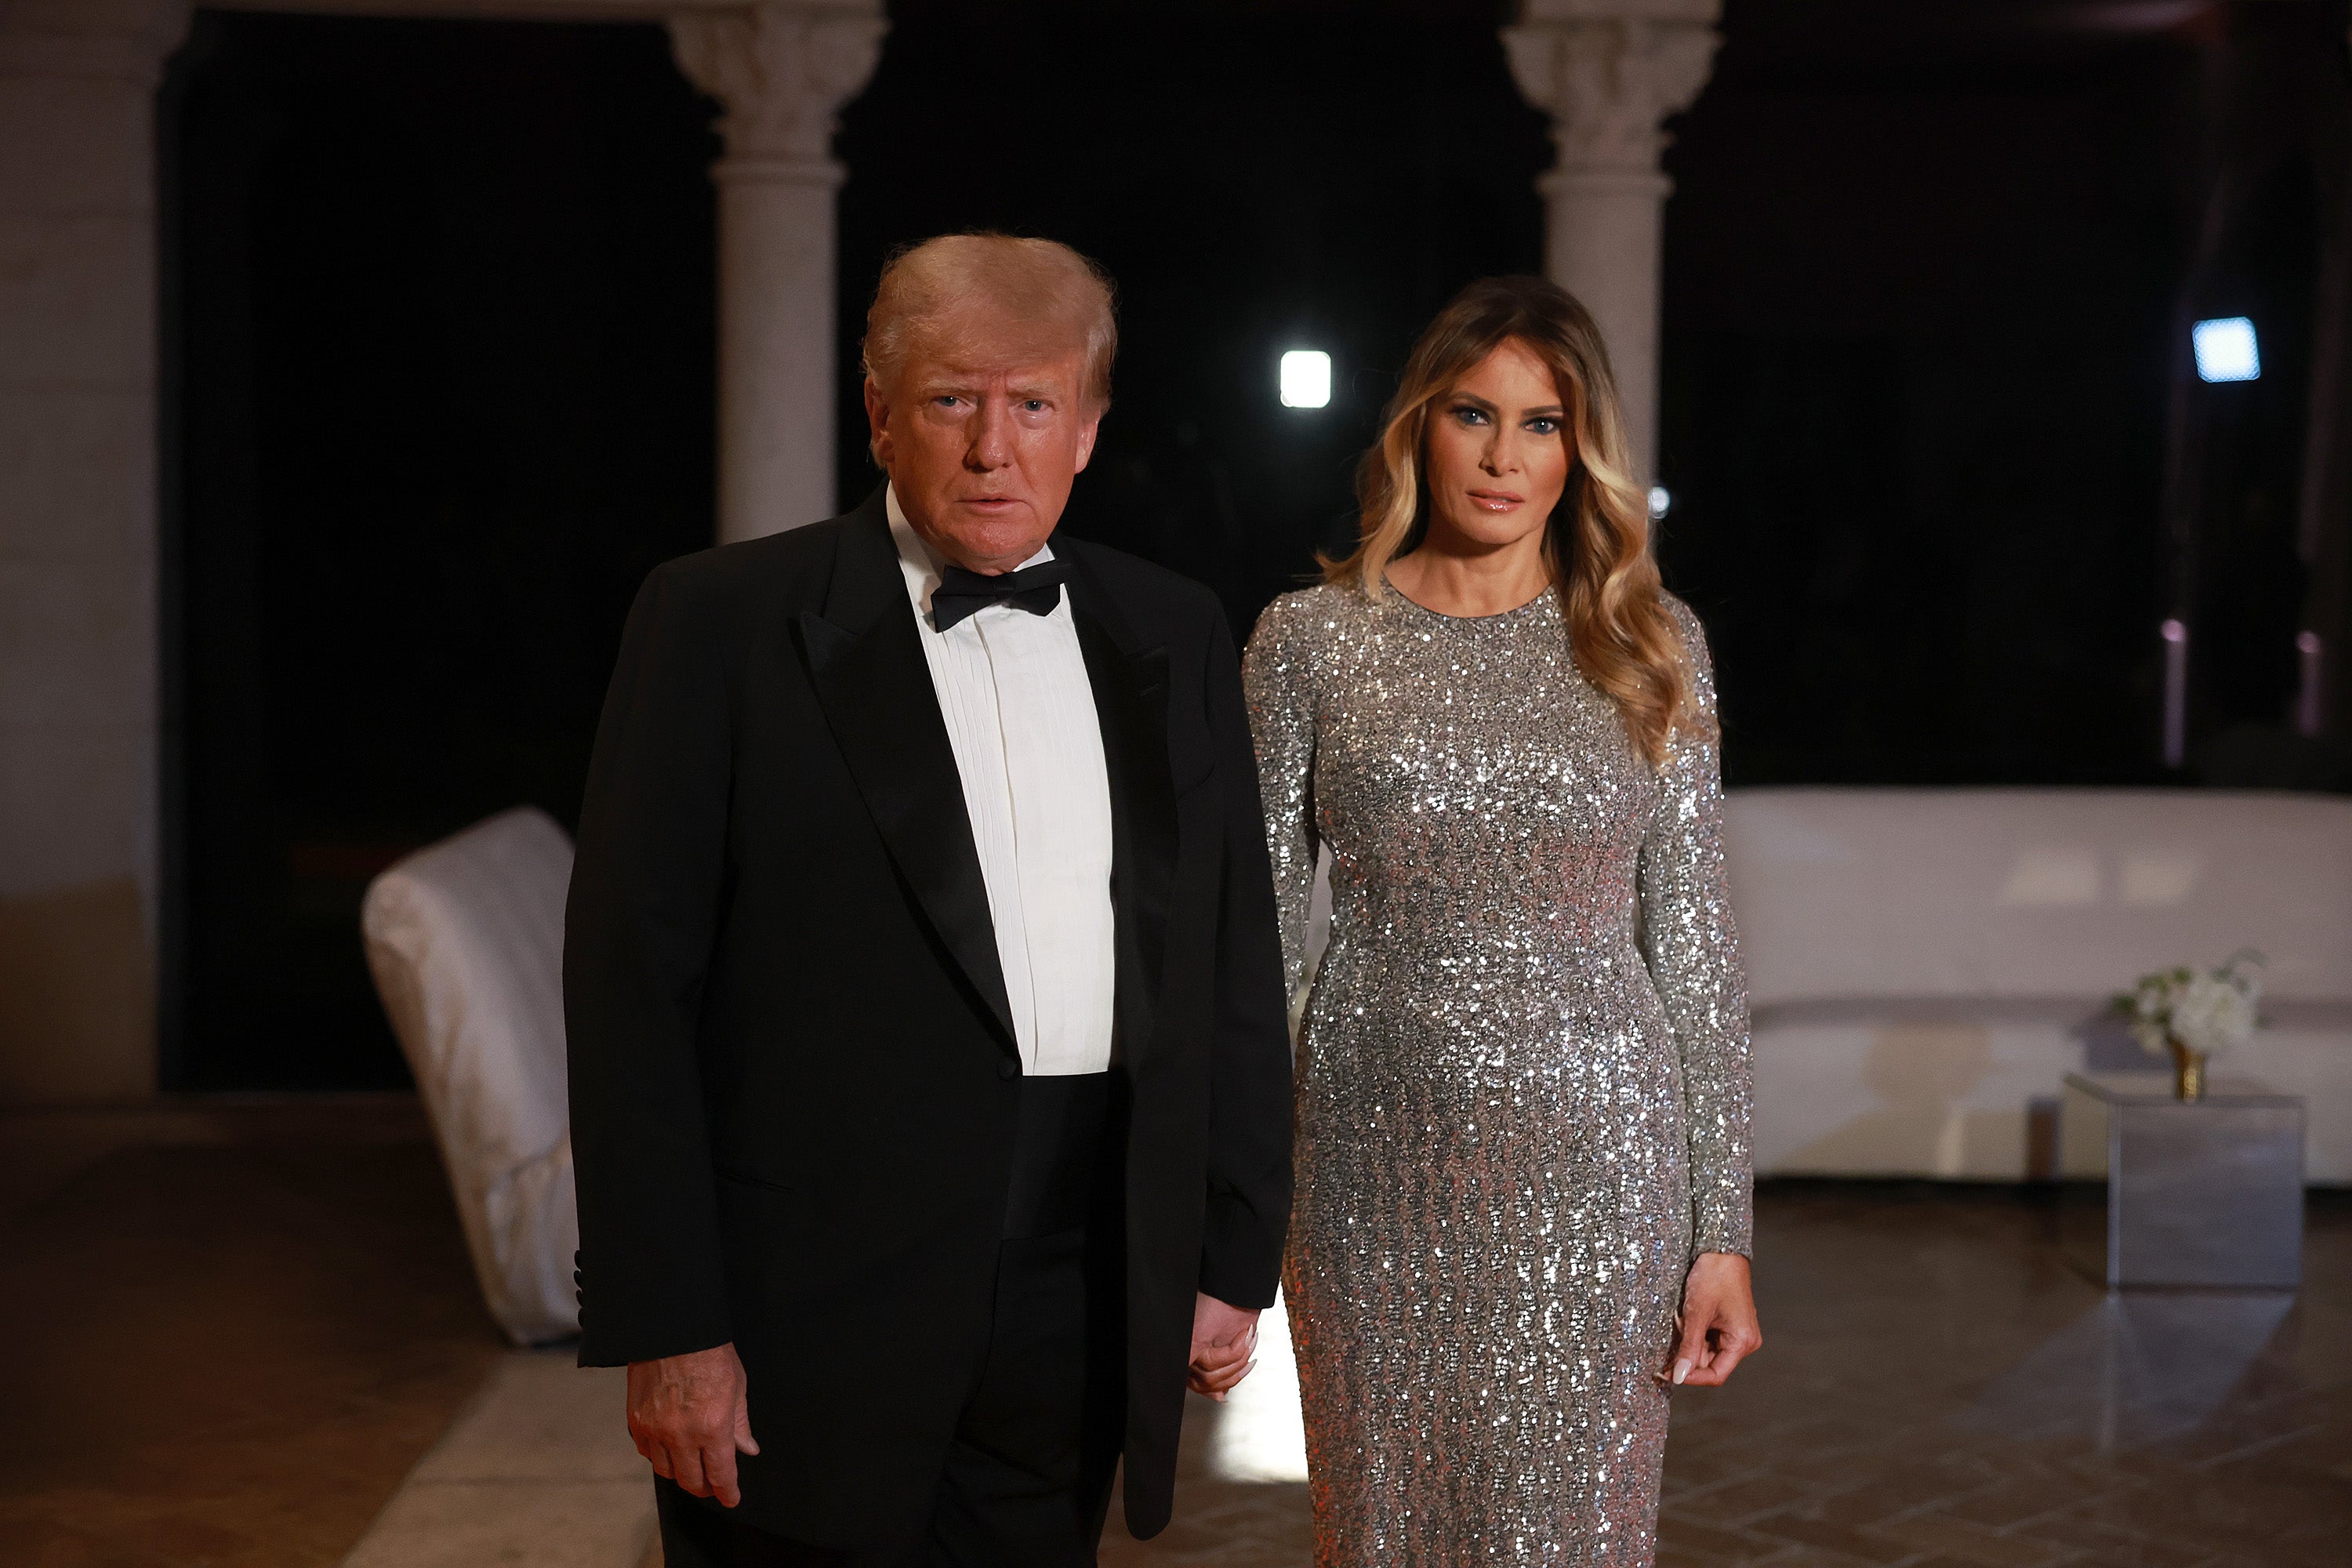 Former president Trump with his wife Melania